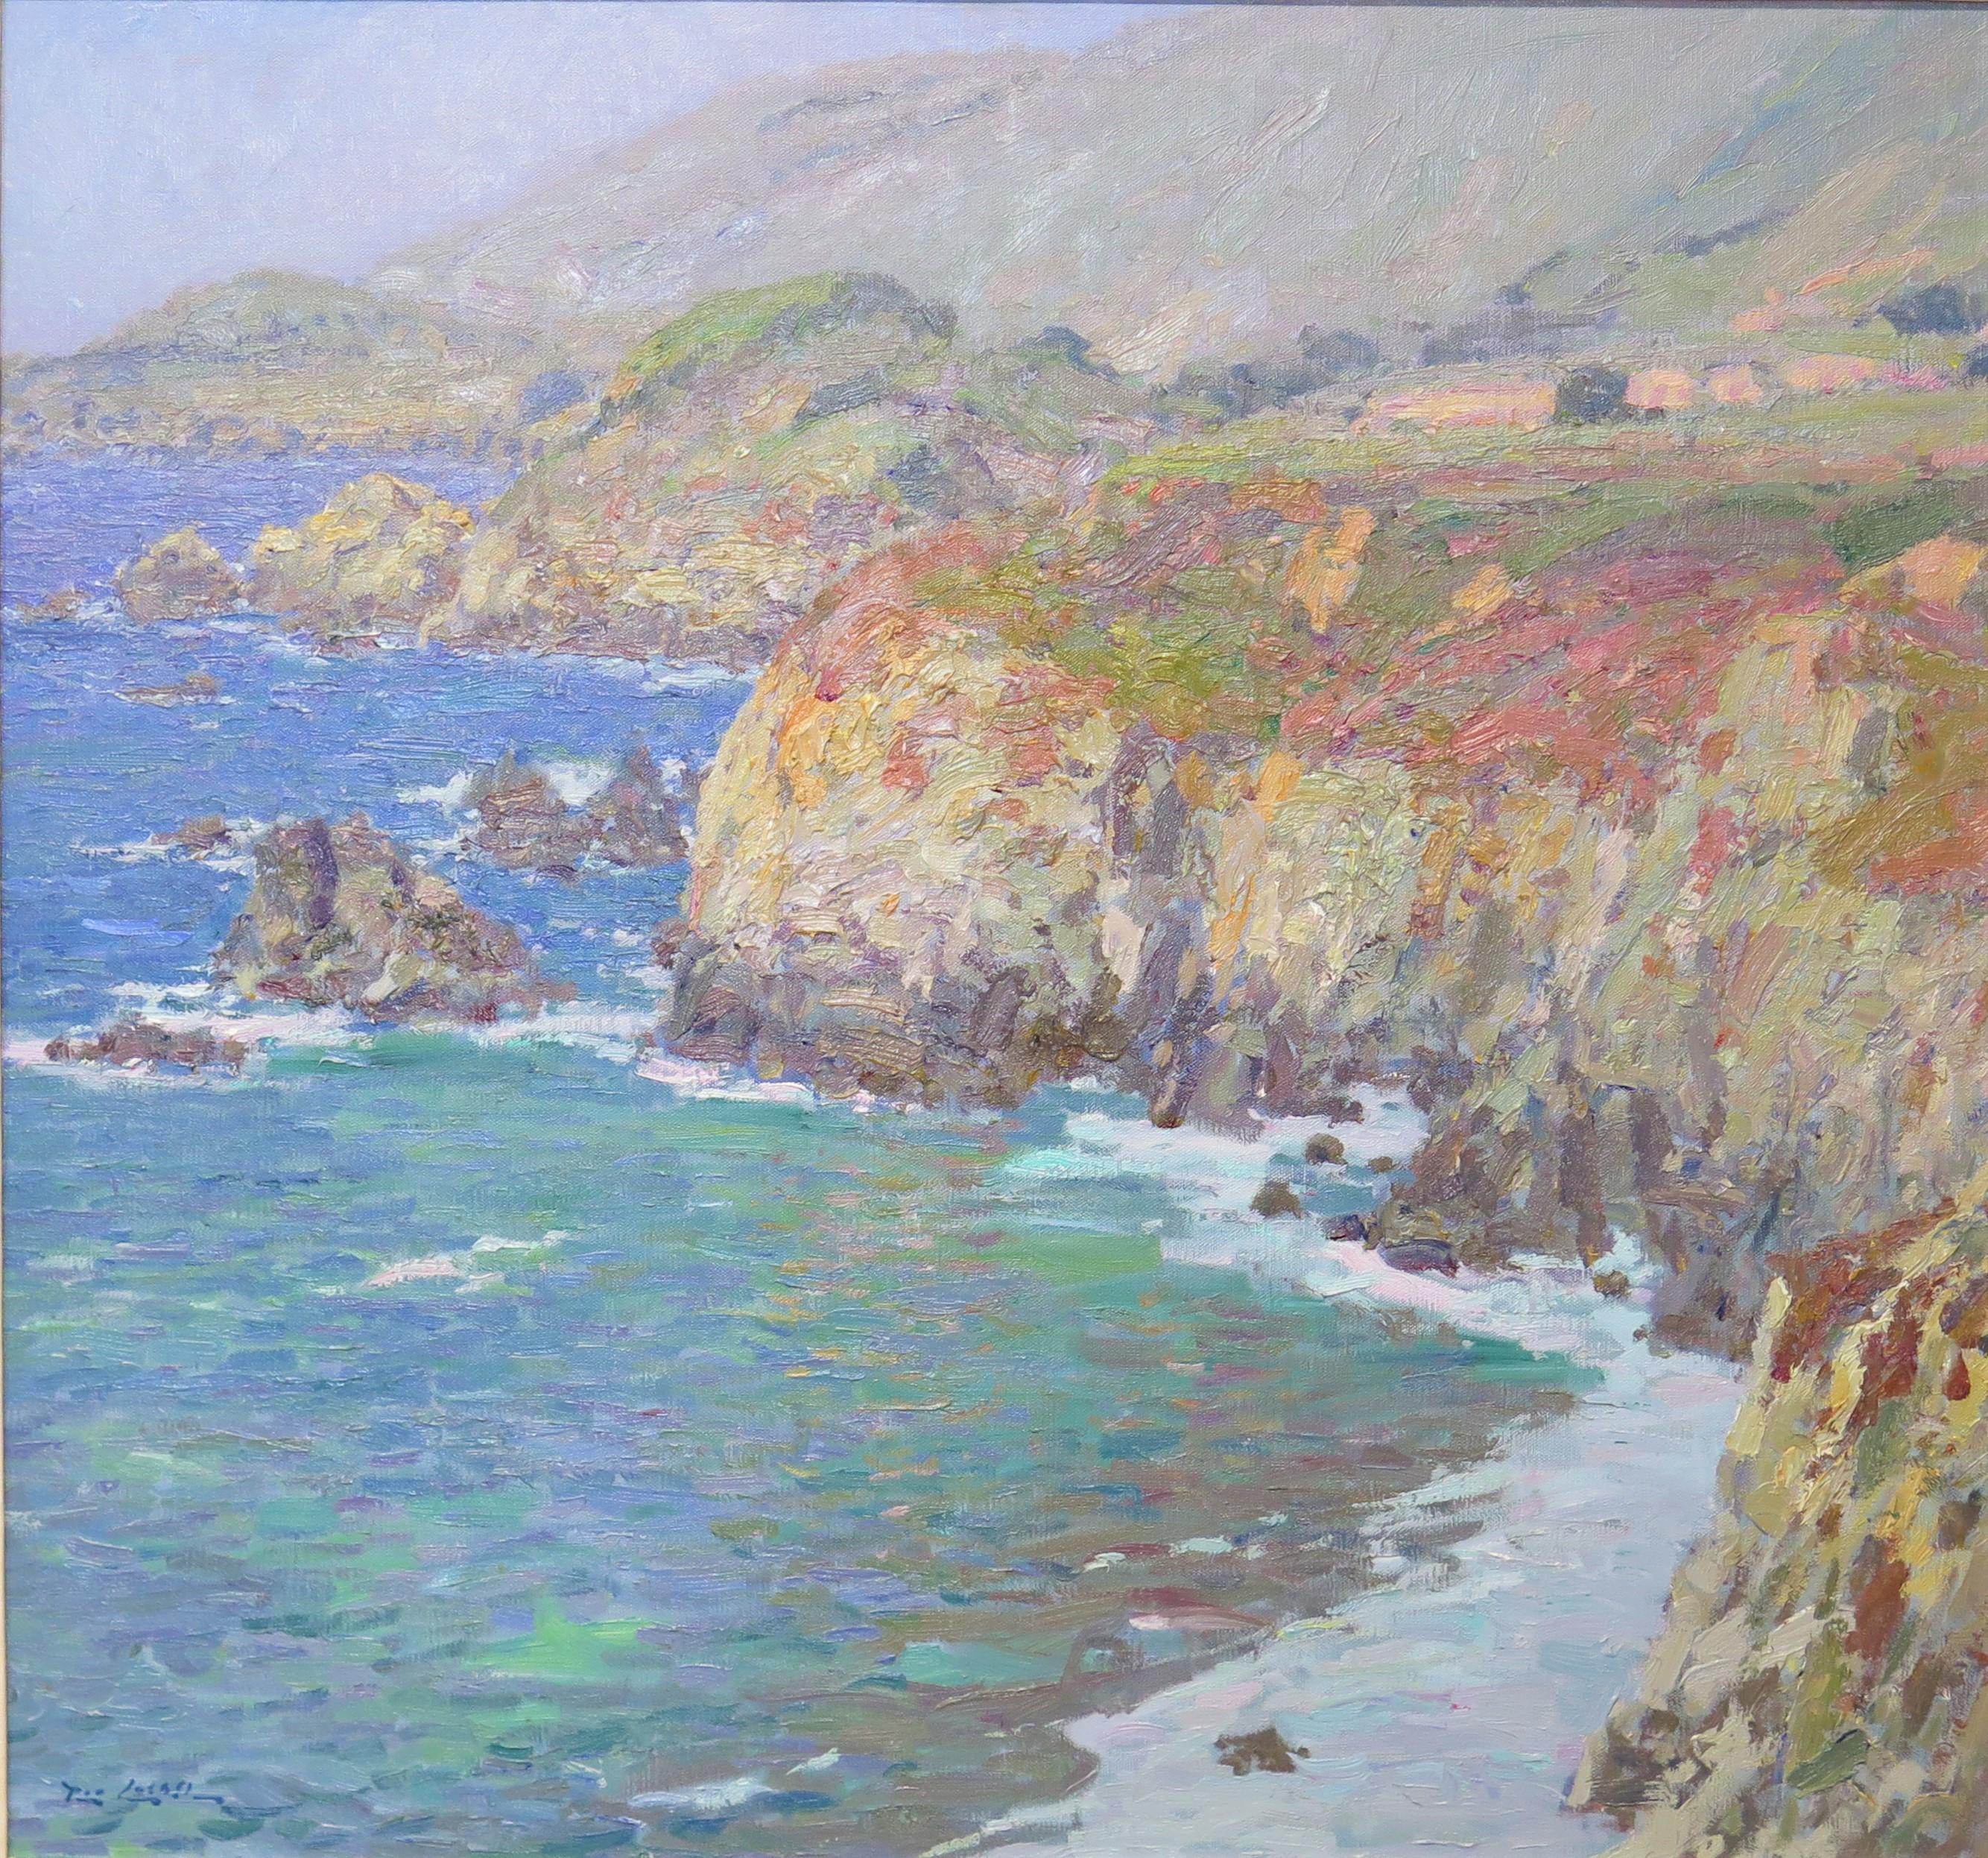 SPRING LIGHT, American West / California rocky Pacific coast oil on canvas landscape picture by American painter / artist Rod Goebel (1946-1993) impressionist style, signed front lower left, United States, 20th century

Two gallery labels verso     